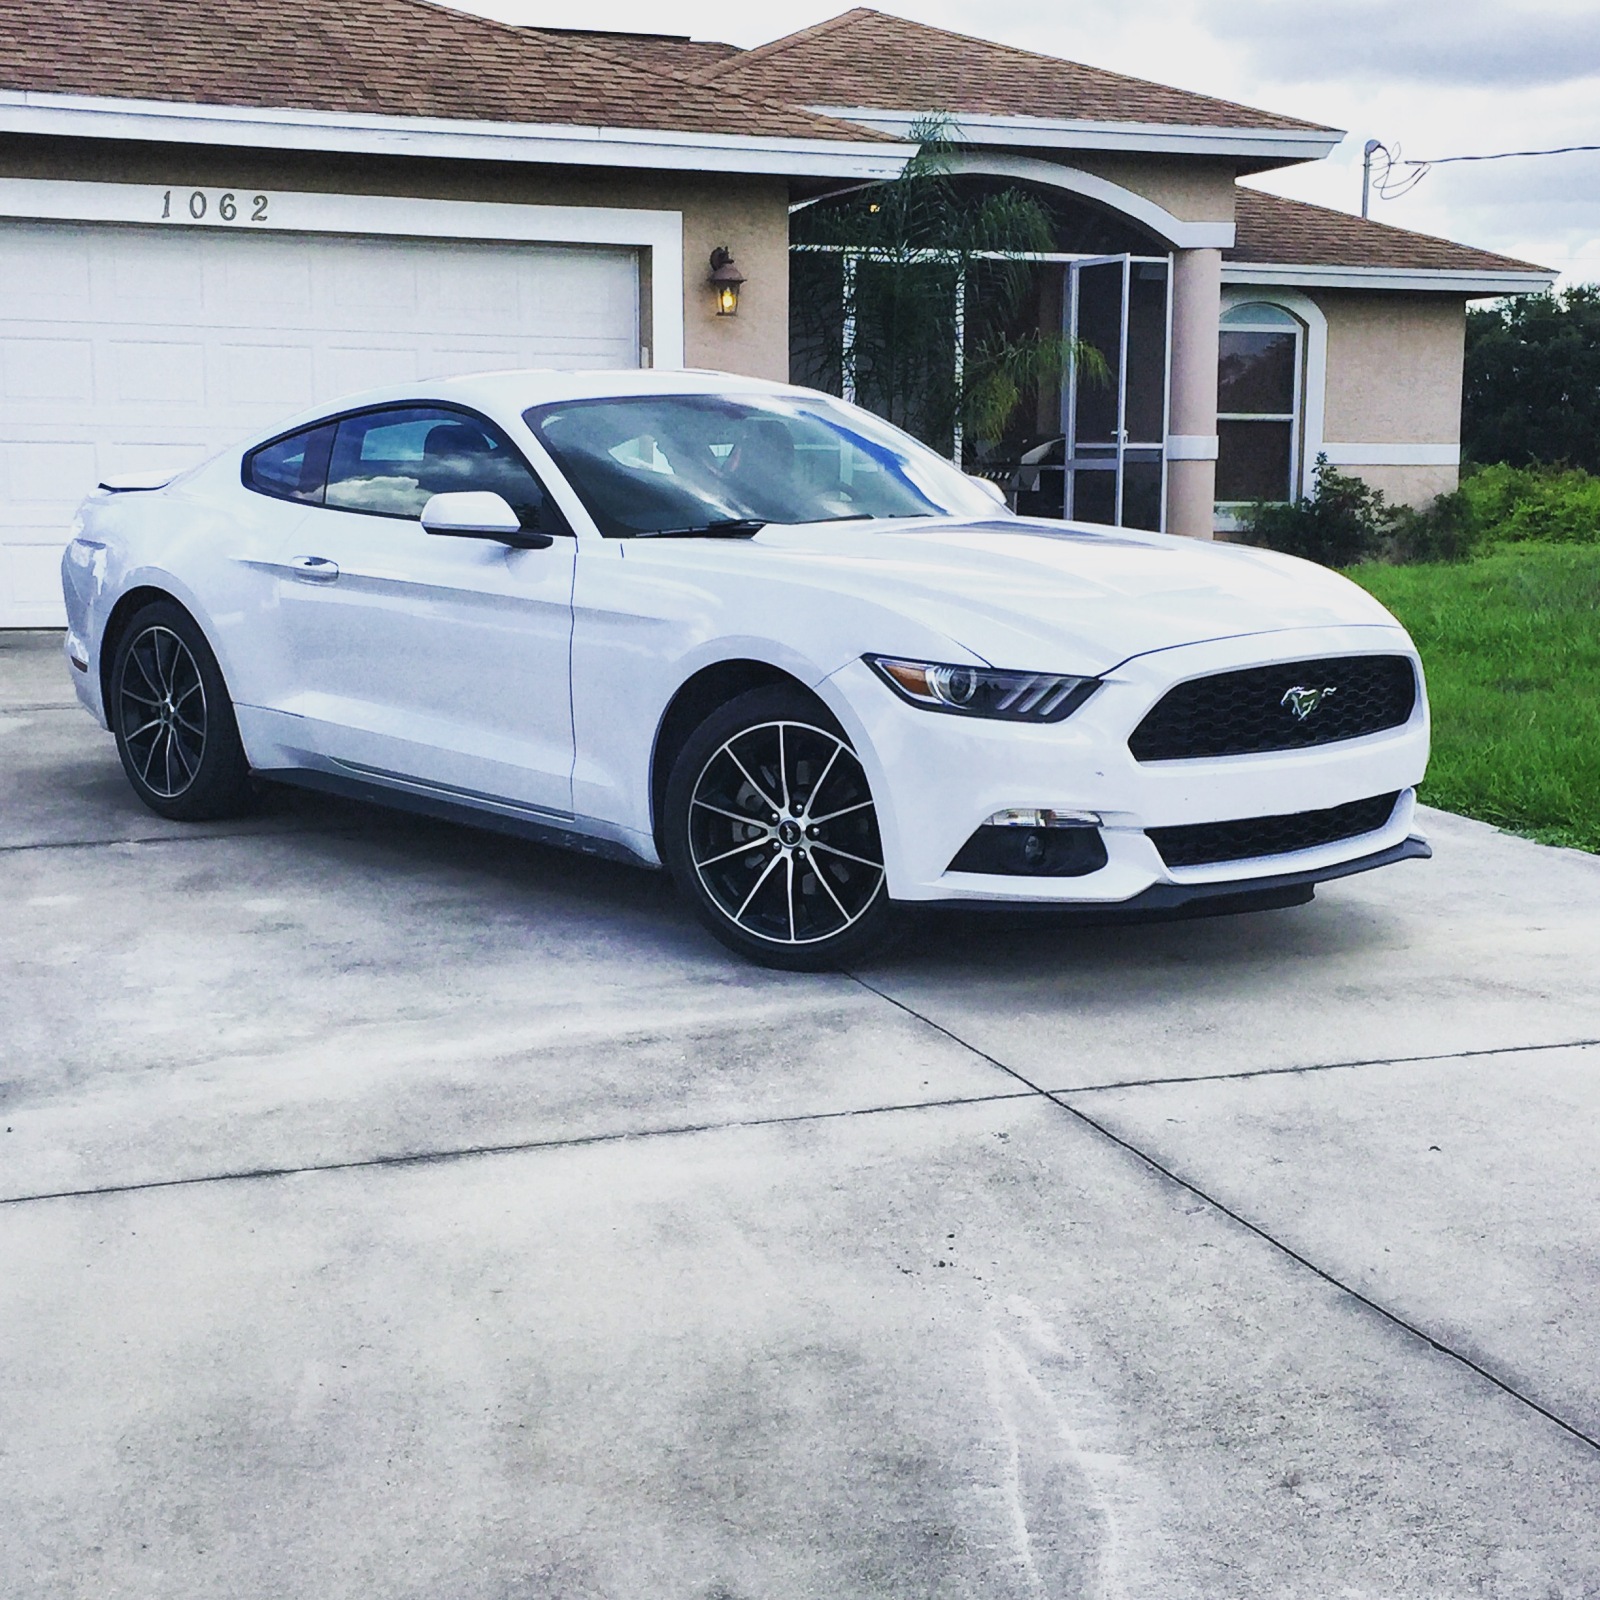 S650 Mustang Post Pictures of Your Car 21d4u9d